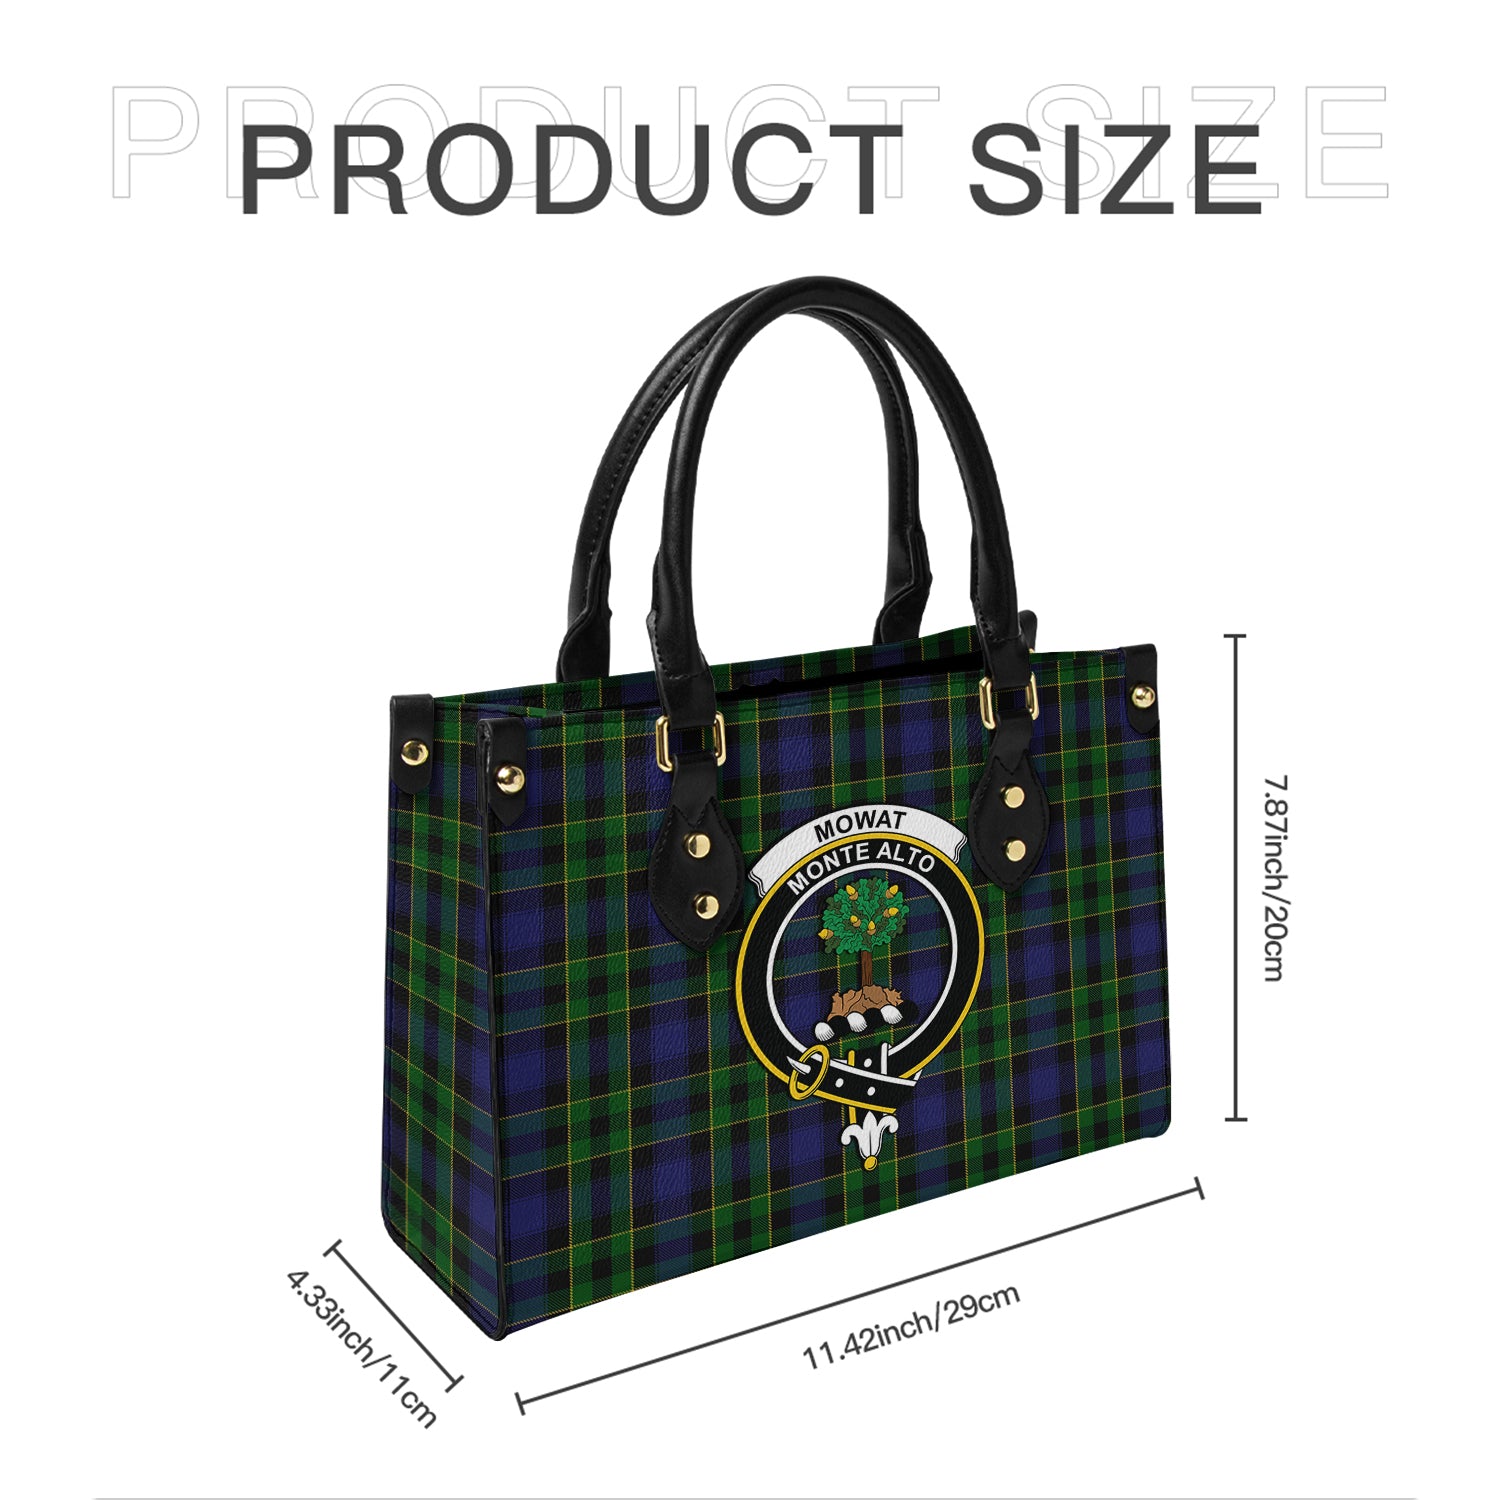 mowat-tartan-leather-bag-with-family-crest